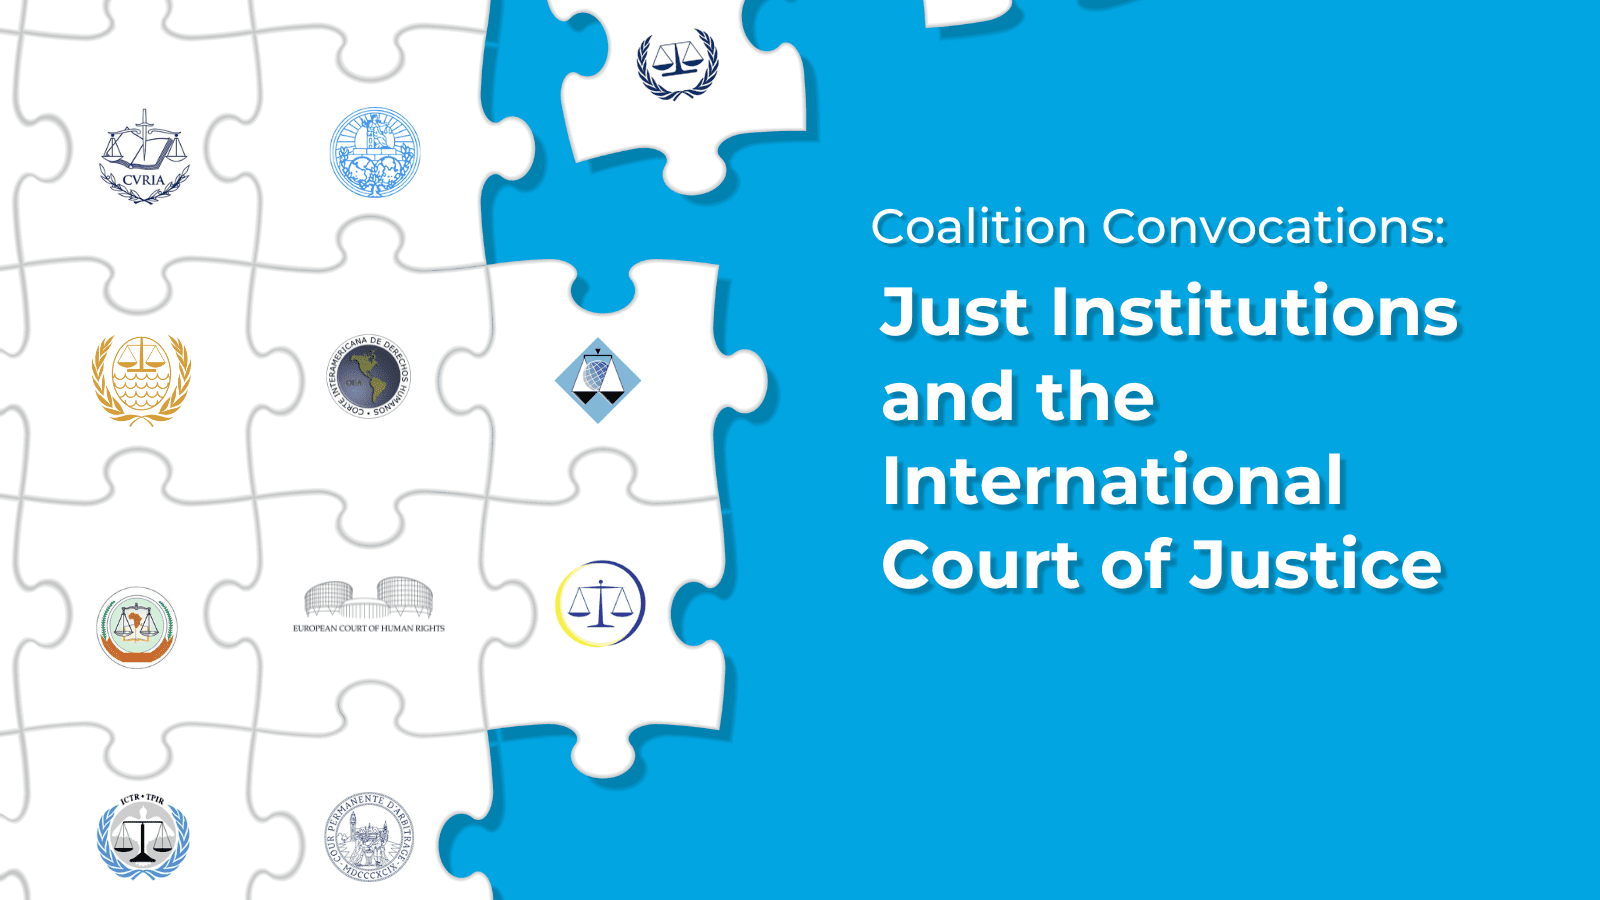 Coalition Convocations: ImPACT Coalition on Just Institutions and the International Court of Justice (ICJ)